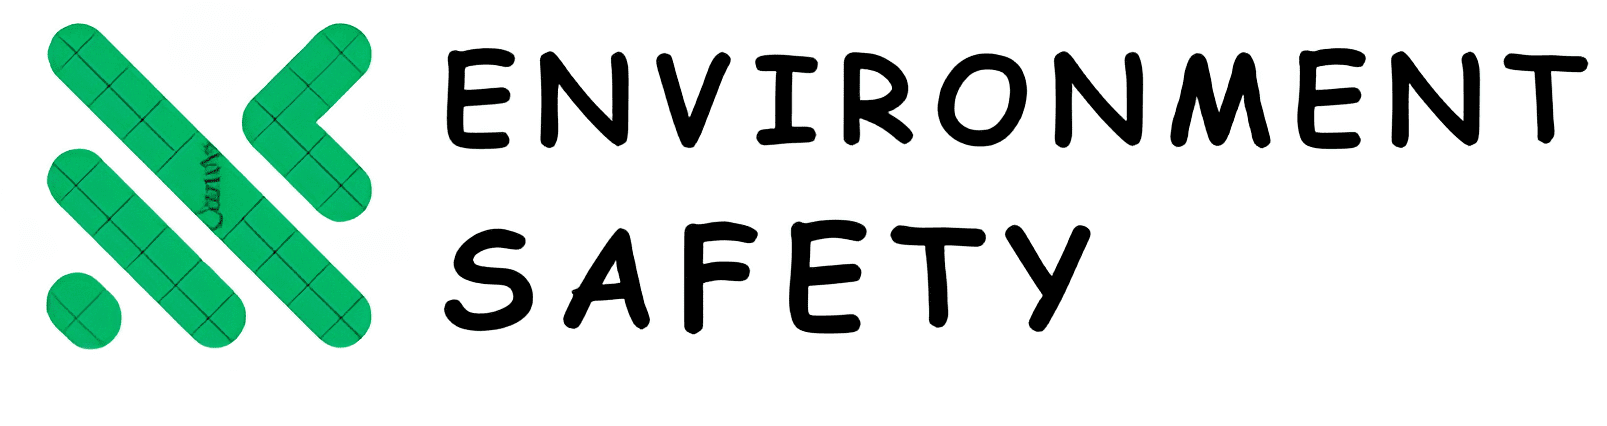 Environment Safety